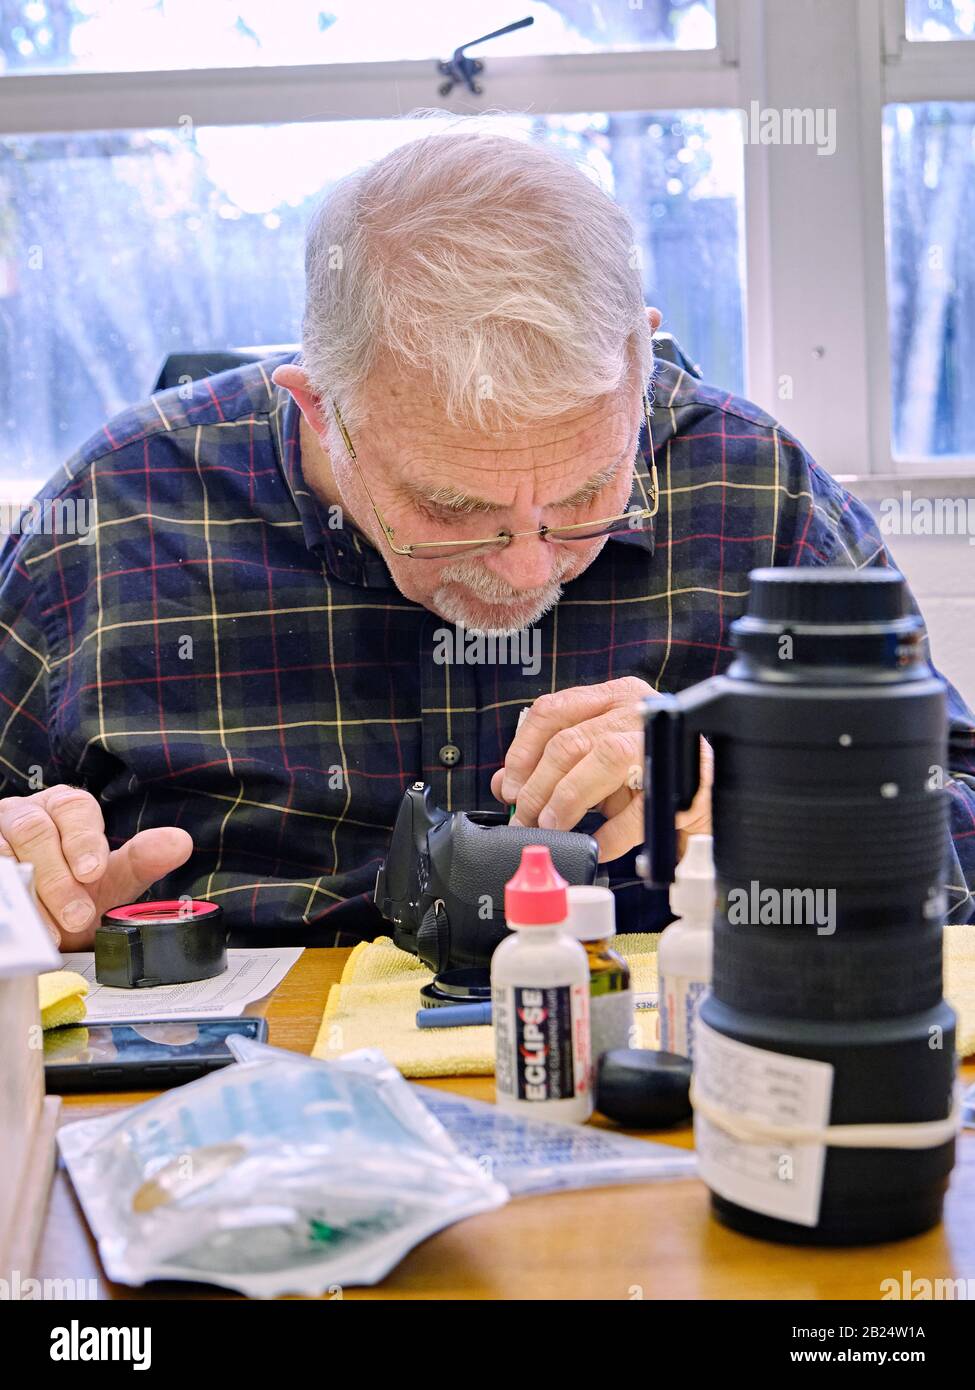 Mature older man, technician, inspecting and cleaning a modern dslr camera or mirrorless camera sensor in Montgomery Alabama, USA. Stock Photo